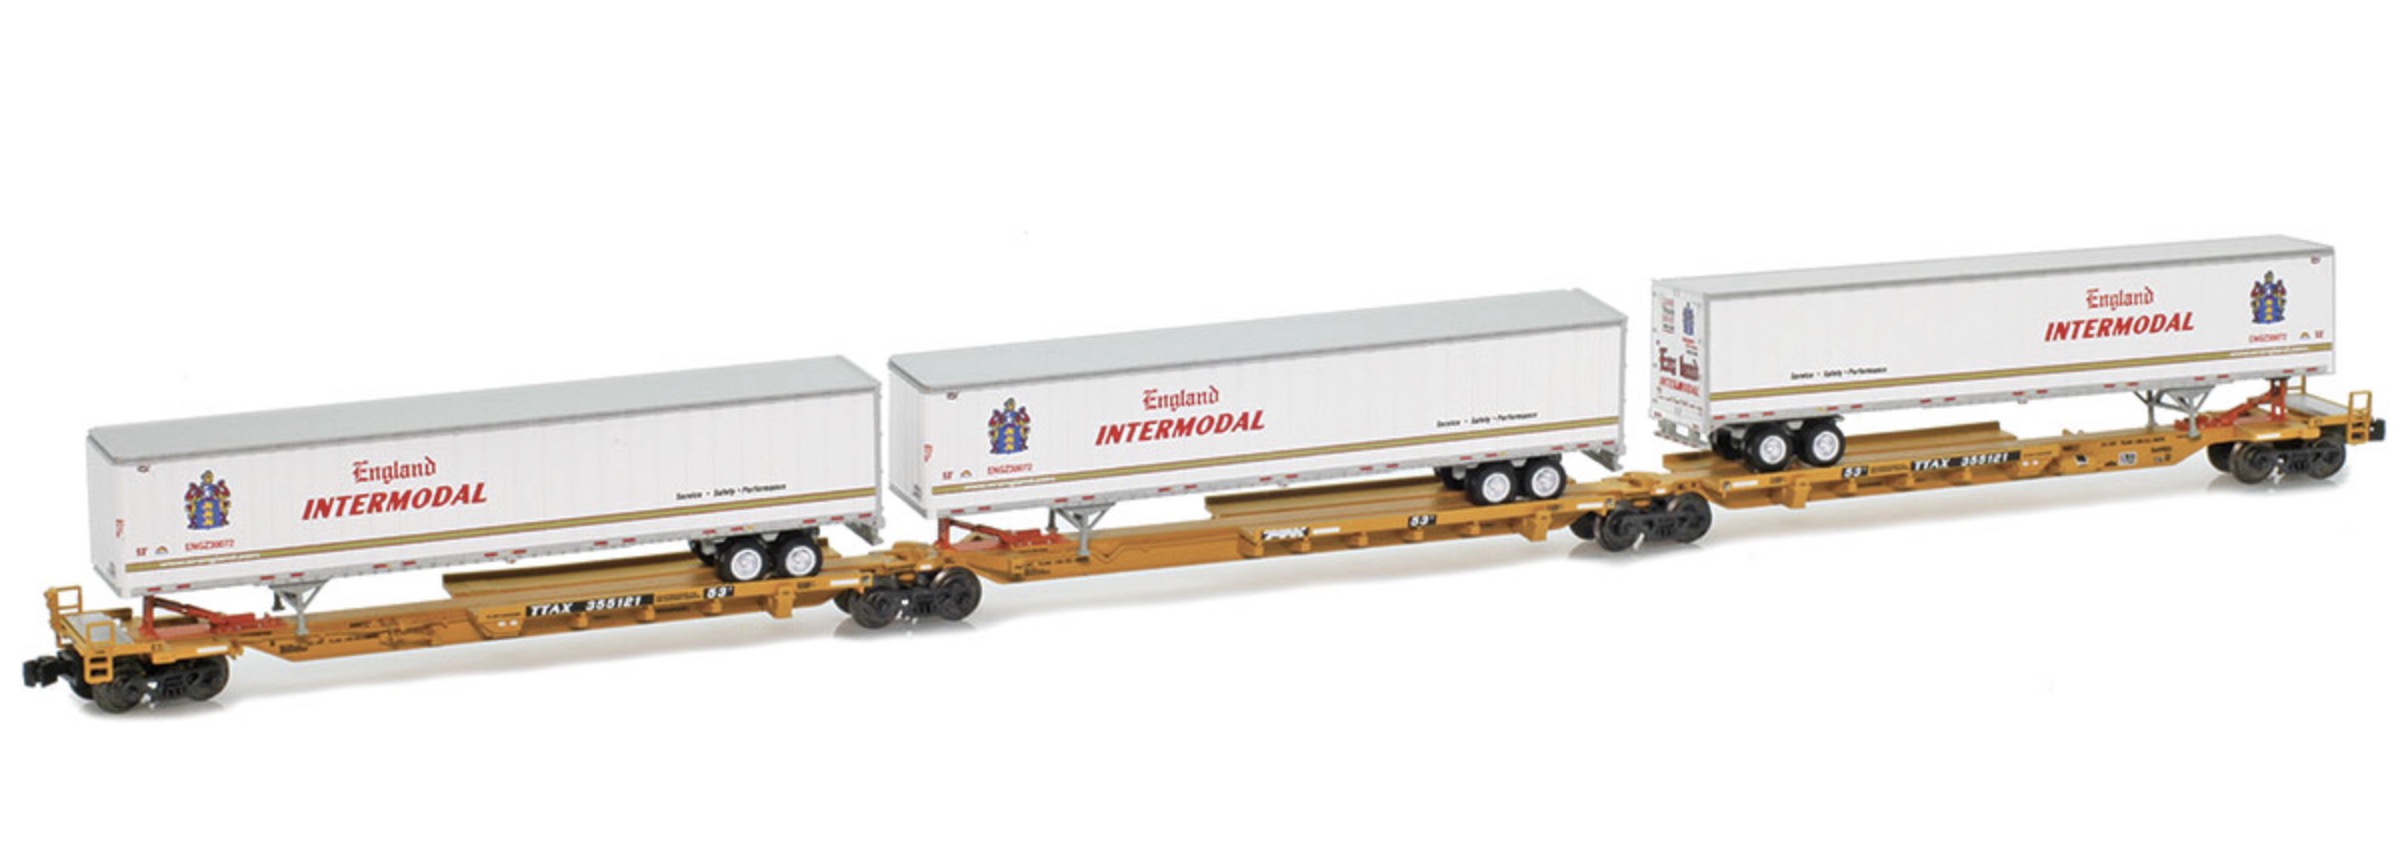 Z Scale - AZL - 905234-1 - Articulated Well, Trinity RAF 53-Foot Spine - TTX Company - 355121